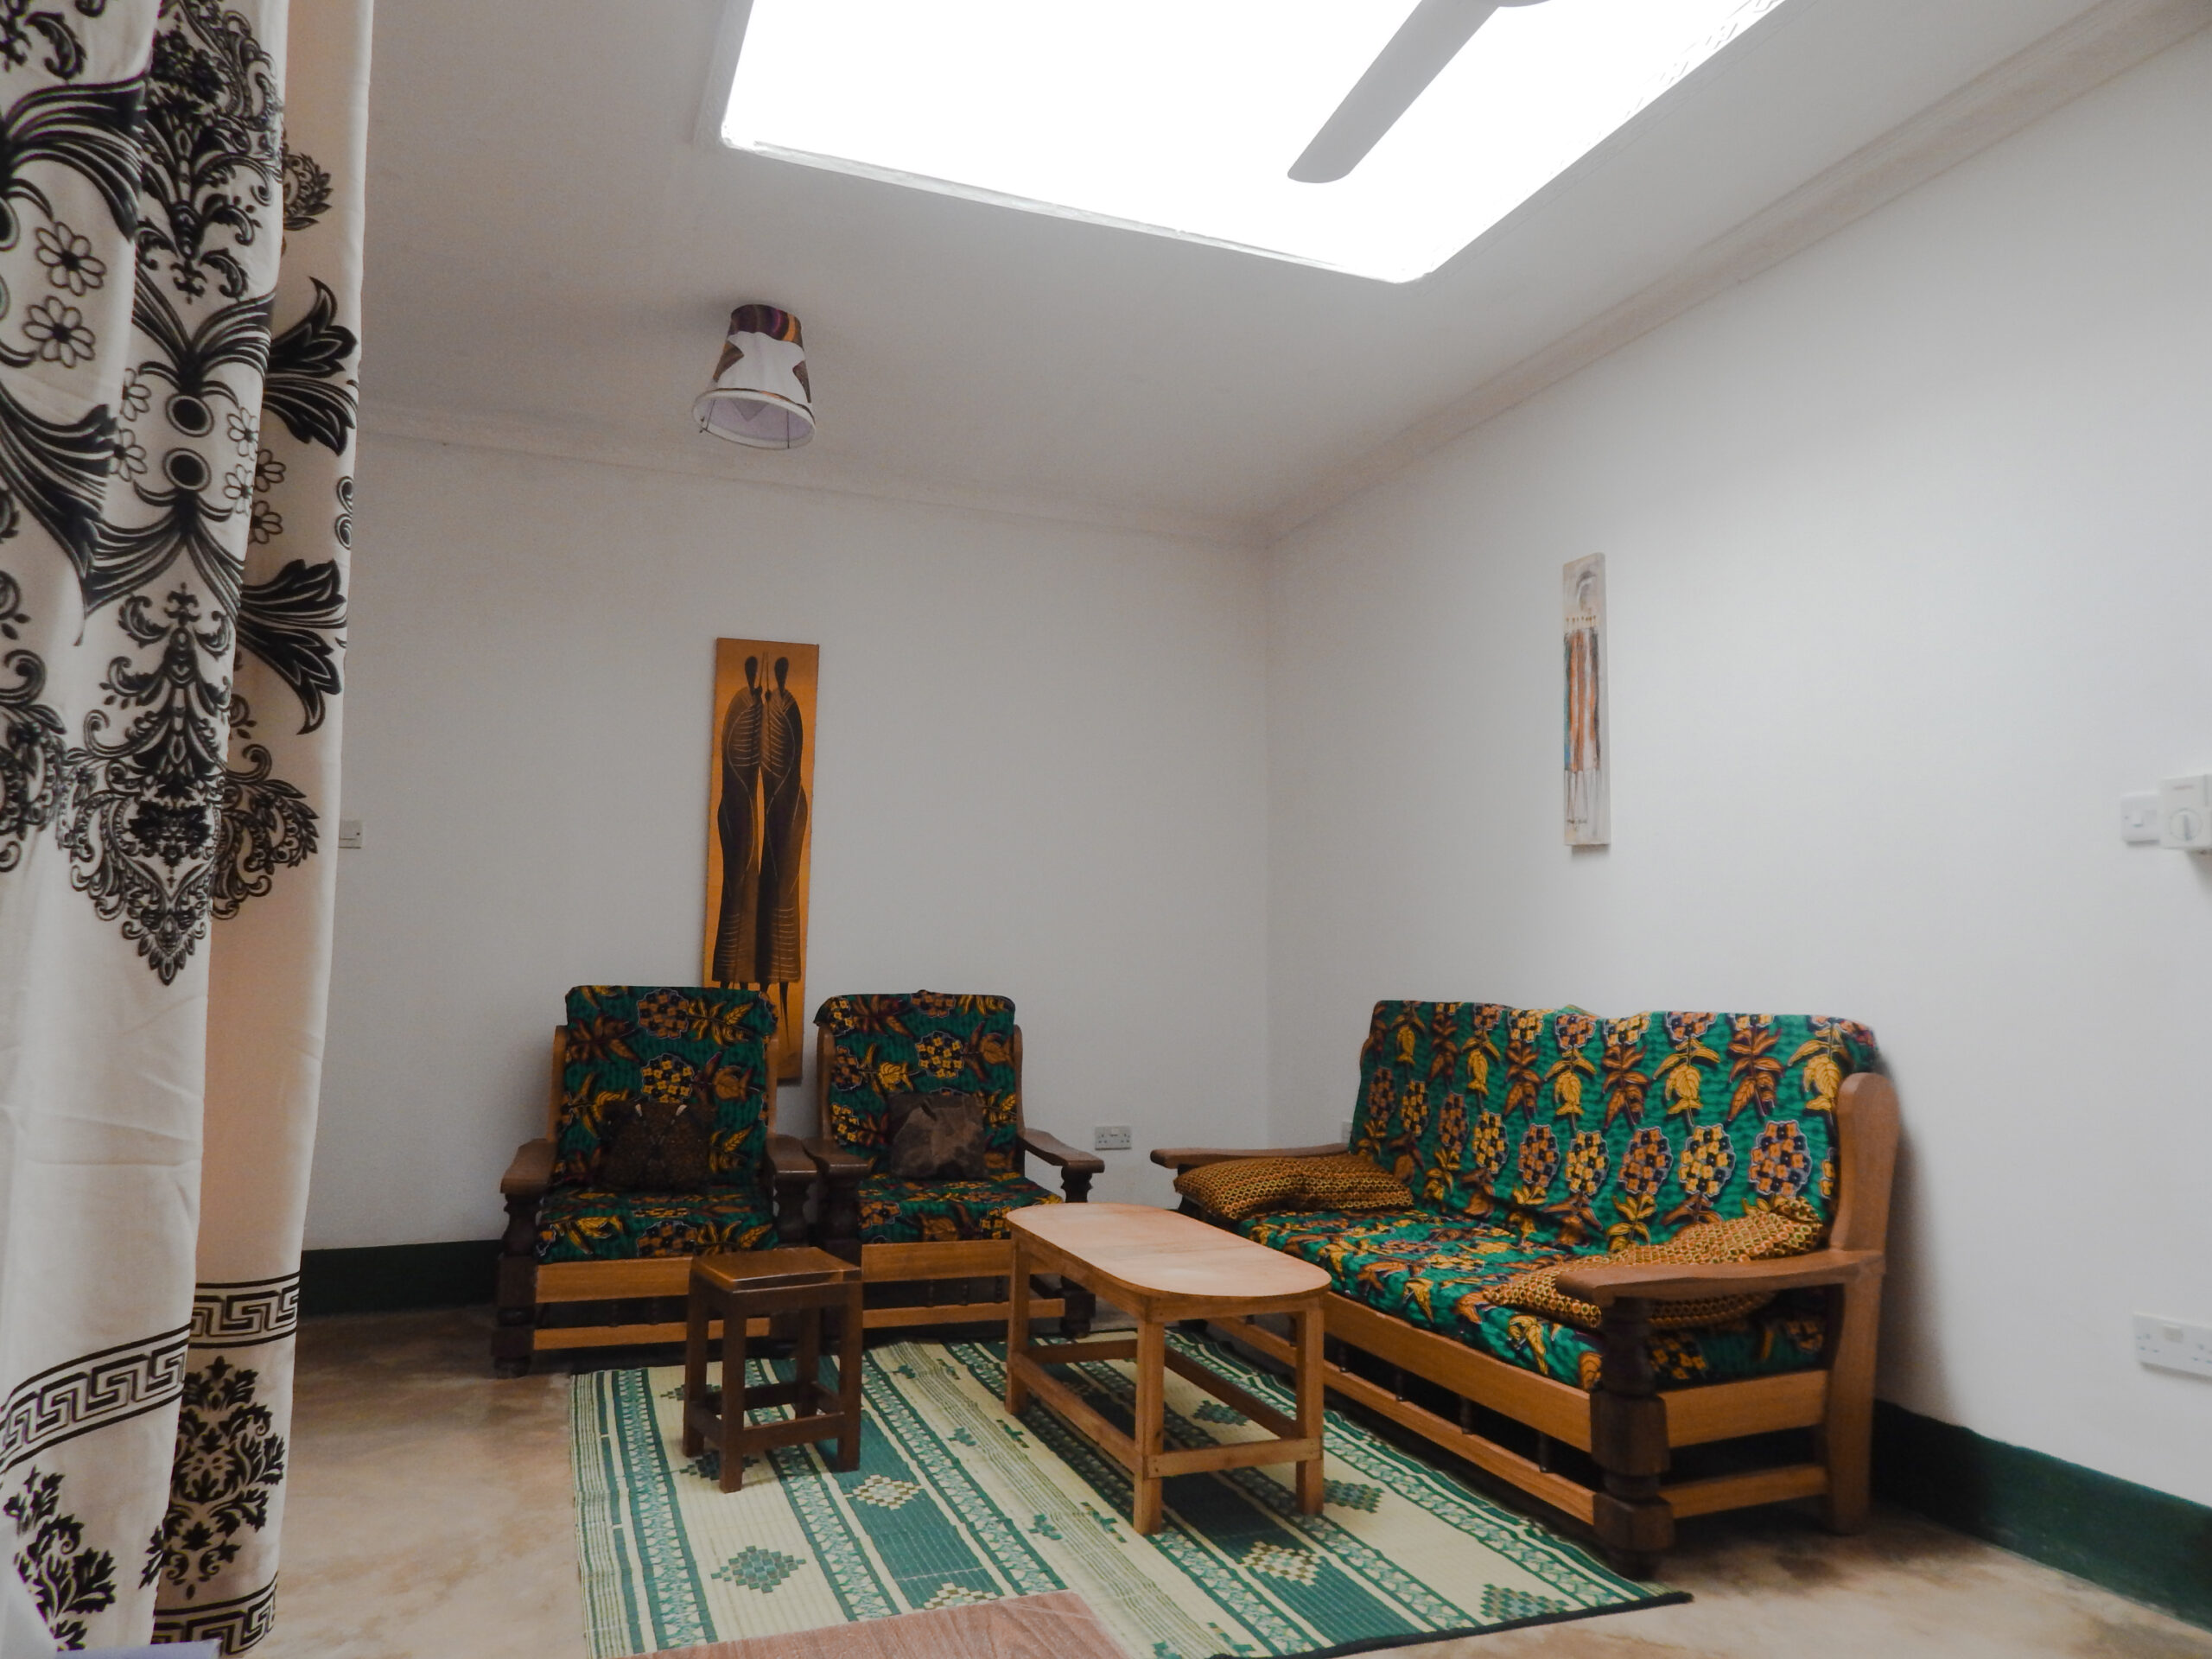 Apartmen in Dodoma with chairs and couch